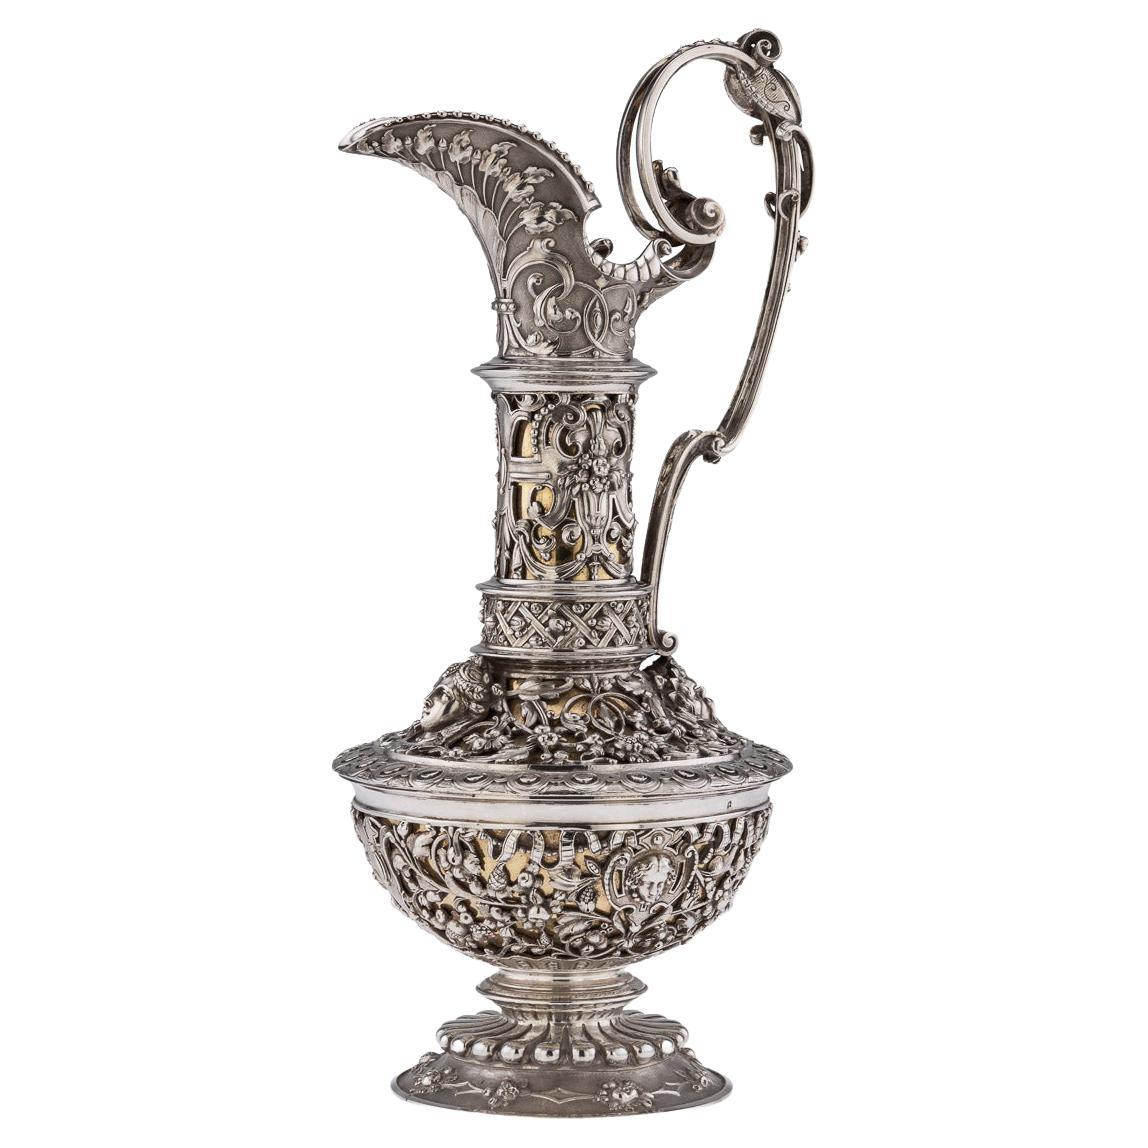 19th Century French Solid Silver Exceptional Figural Ewer, Odiot, c.1880